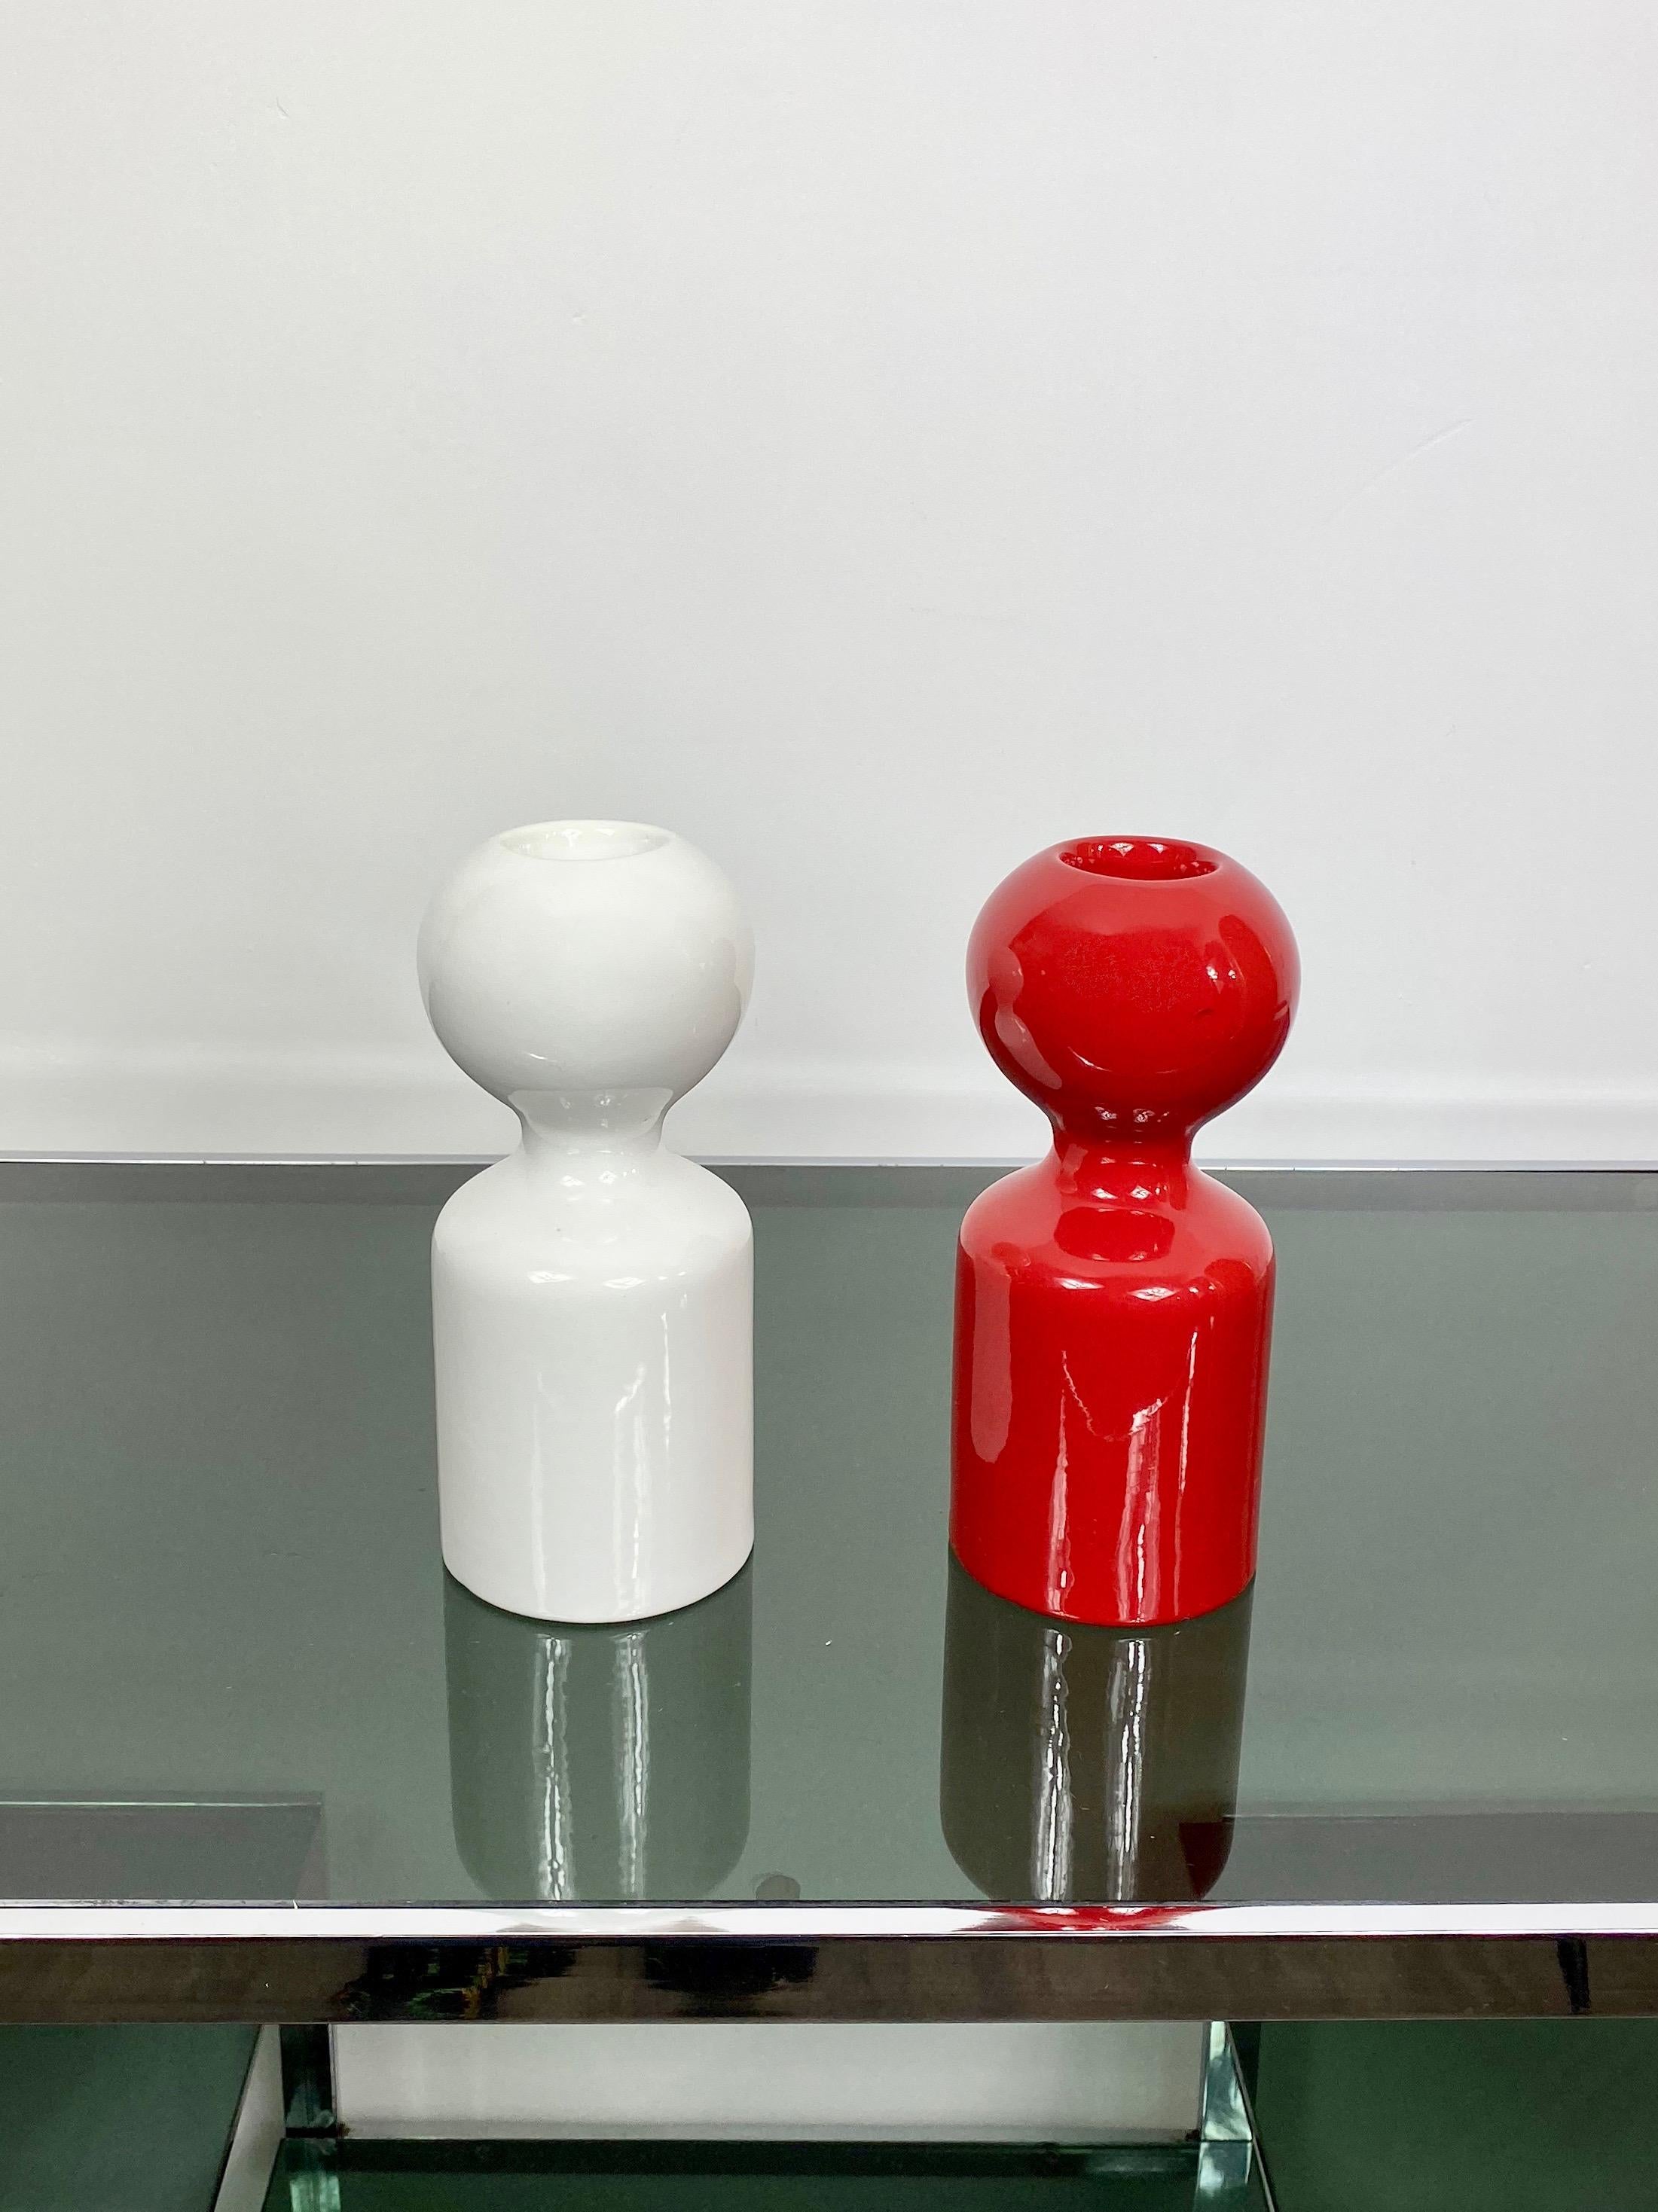 Pair of candleholders designed by Liisi Beckmann for Gabbianelli in ceramic, red and white. Made in Italy, circa 1960.
Signed on the bottom with 